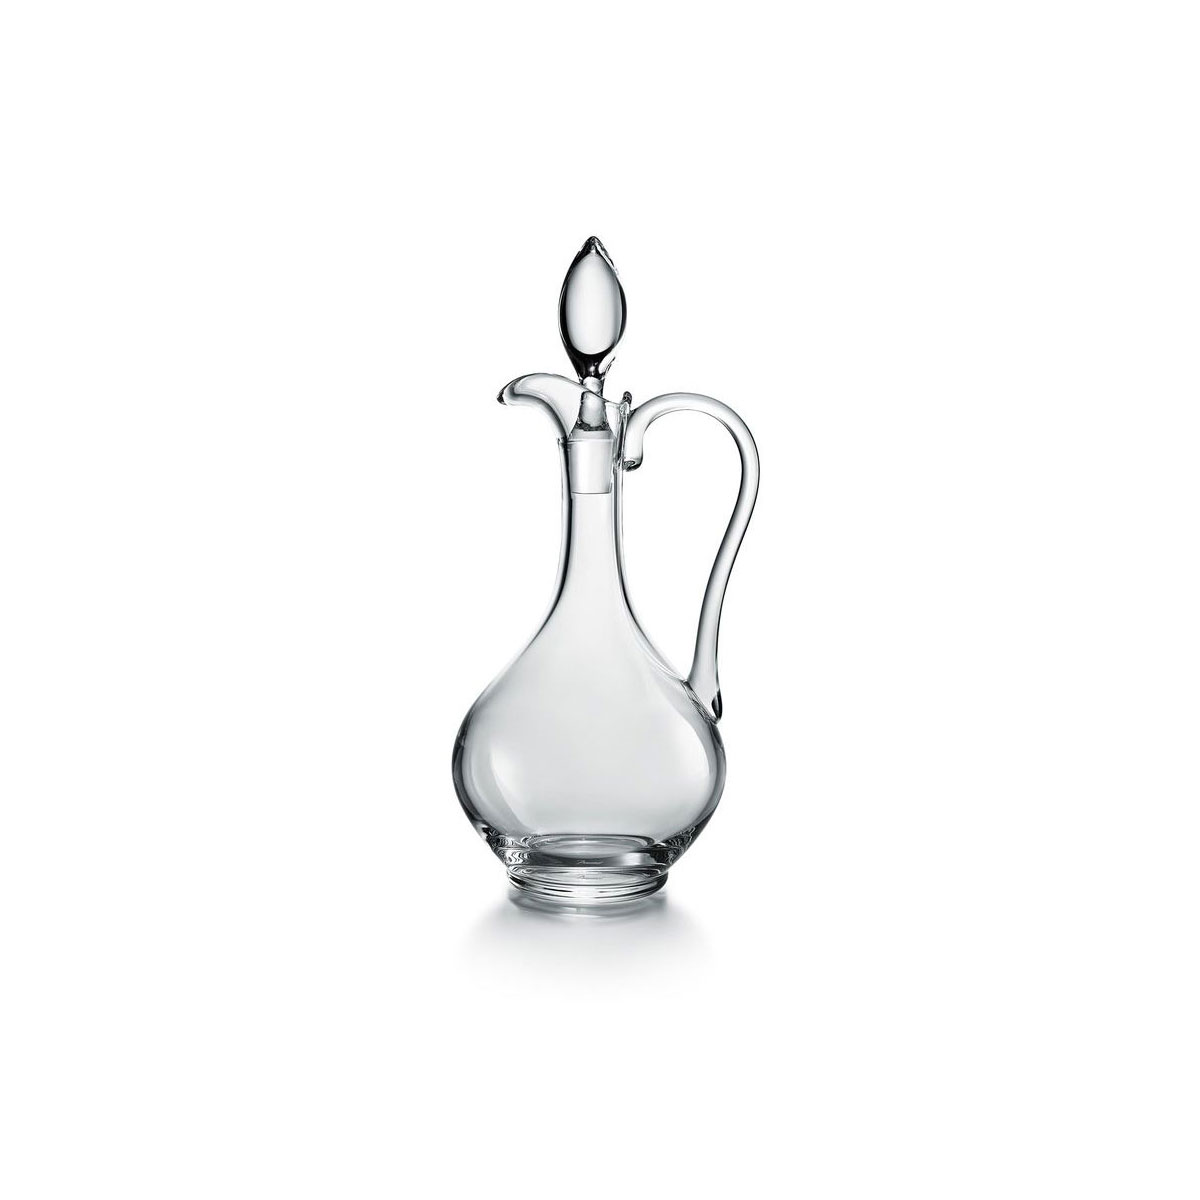 Baccarat Crystal, Oenologie With Handle Crystal Decanter